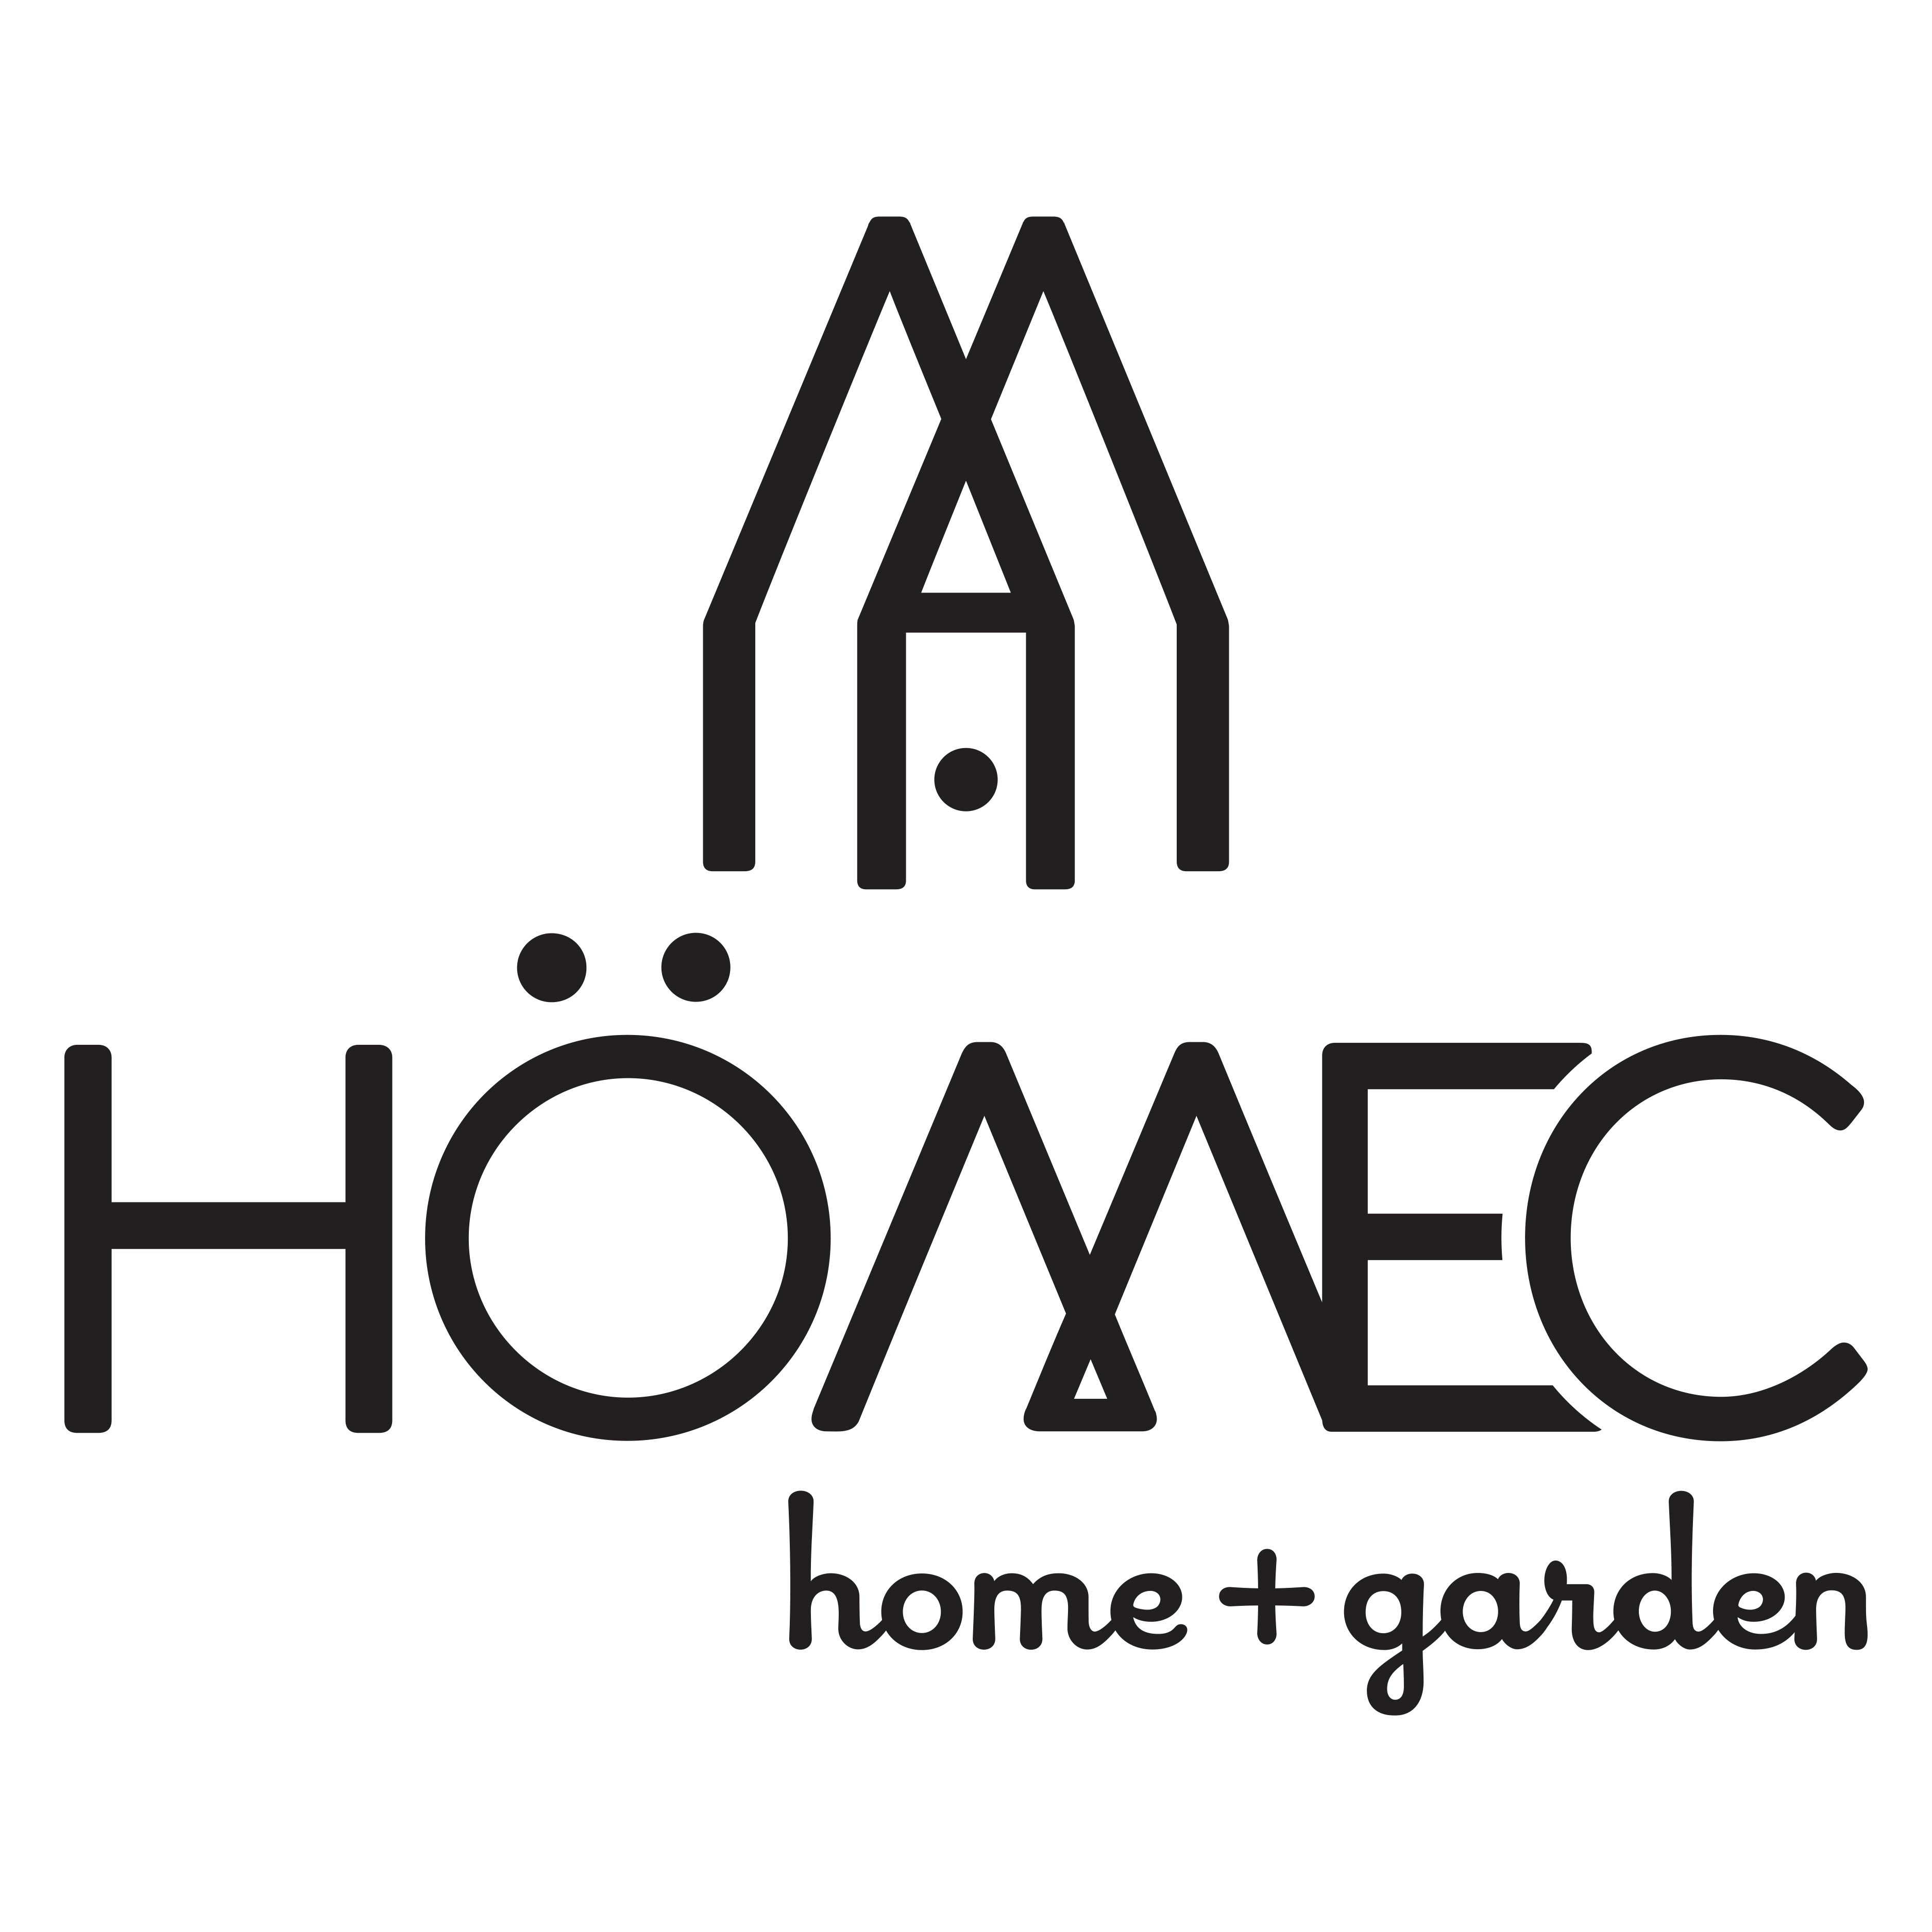 HomEc Home & Garden logo design by logo designer 3 Clever Broads for your inspiration and for the worlds largest logo competition